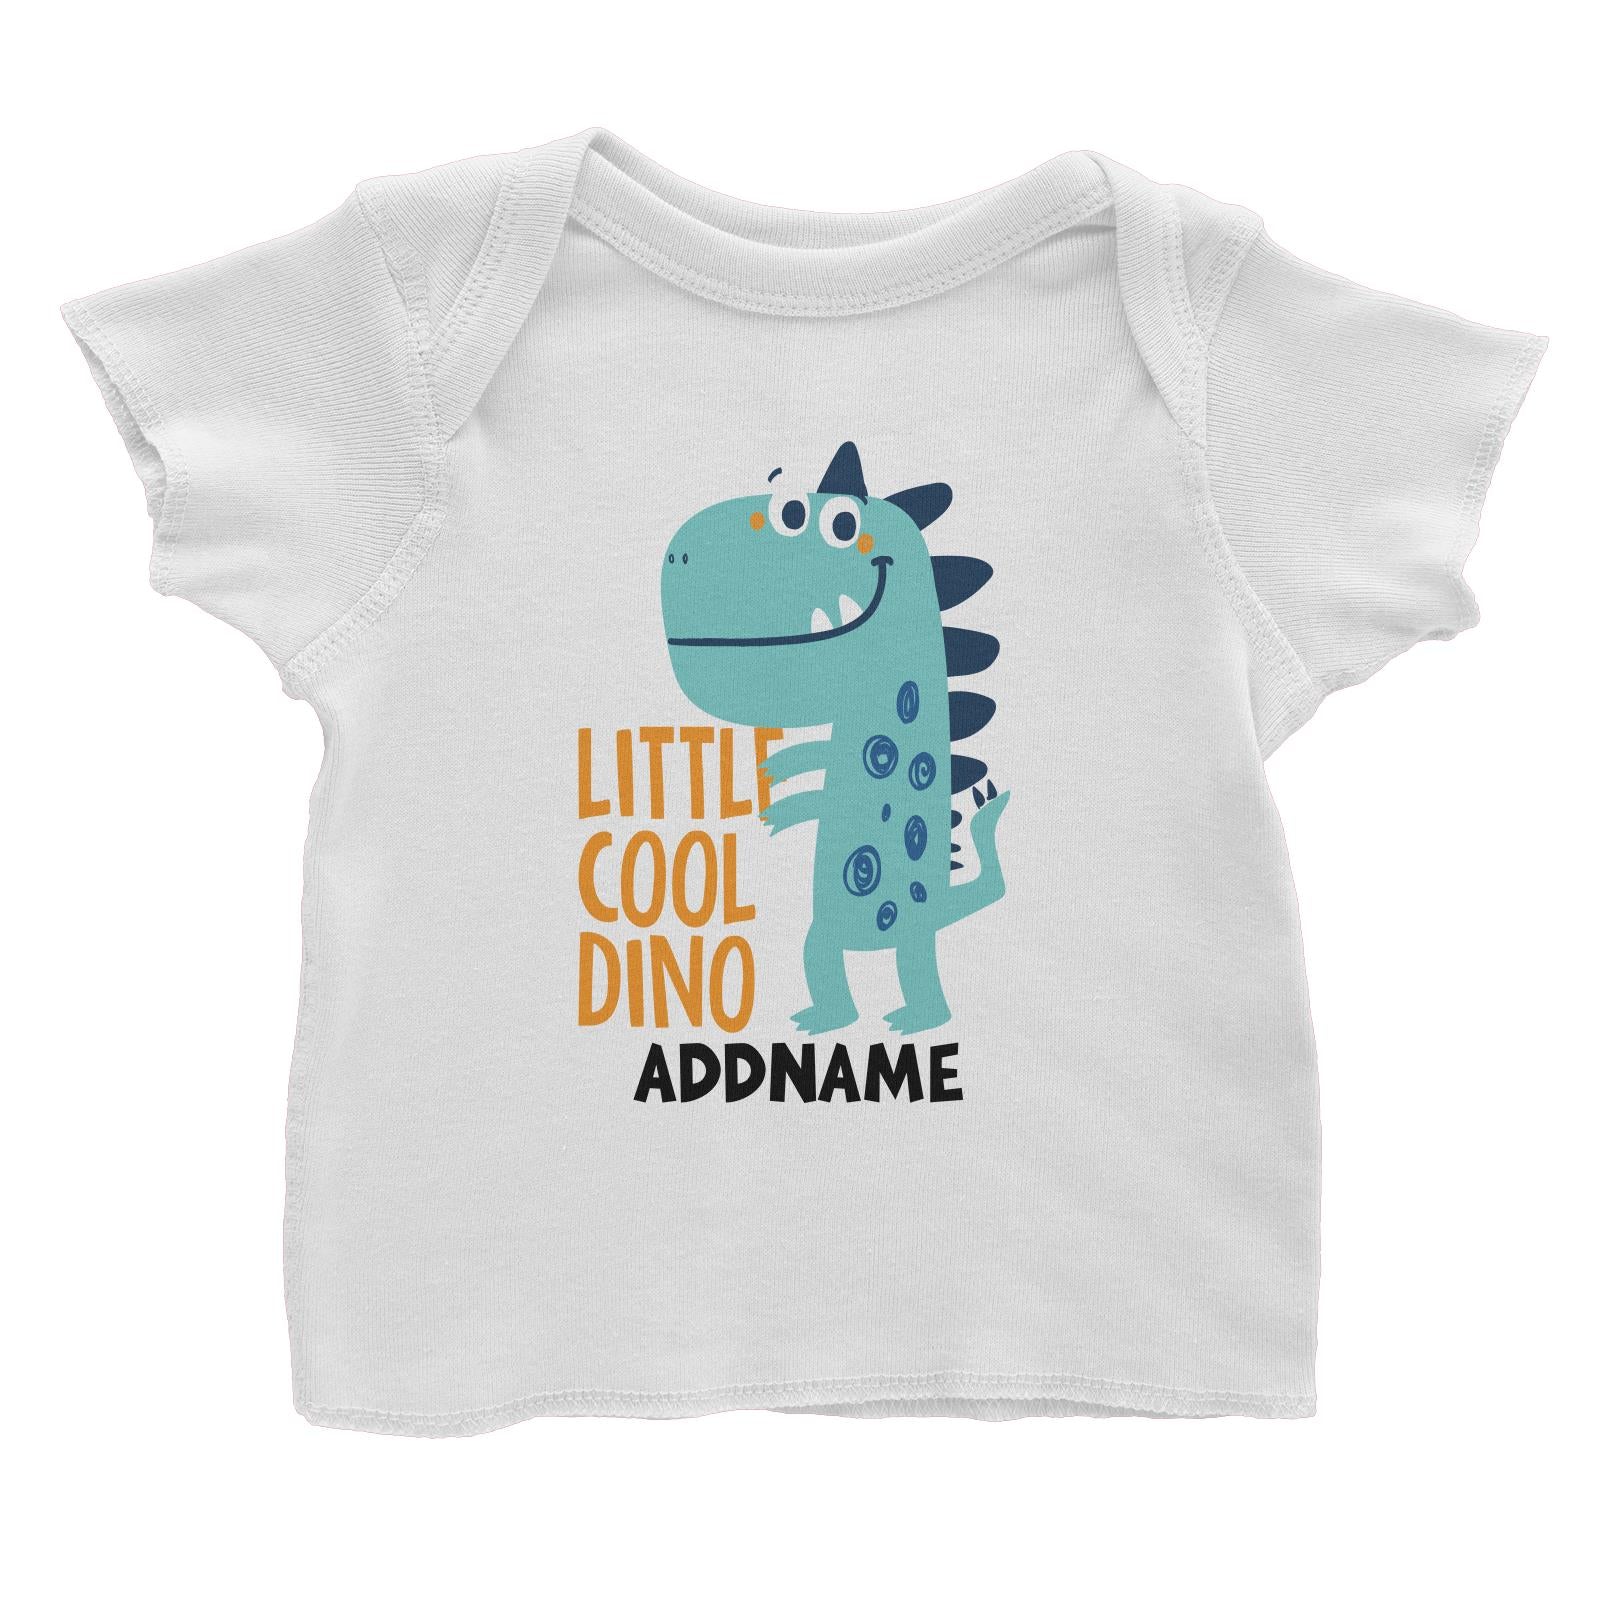 Little Cool Dino Addname White Baby T-Shirt